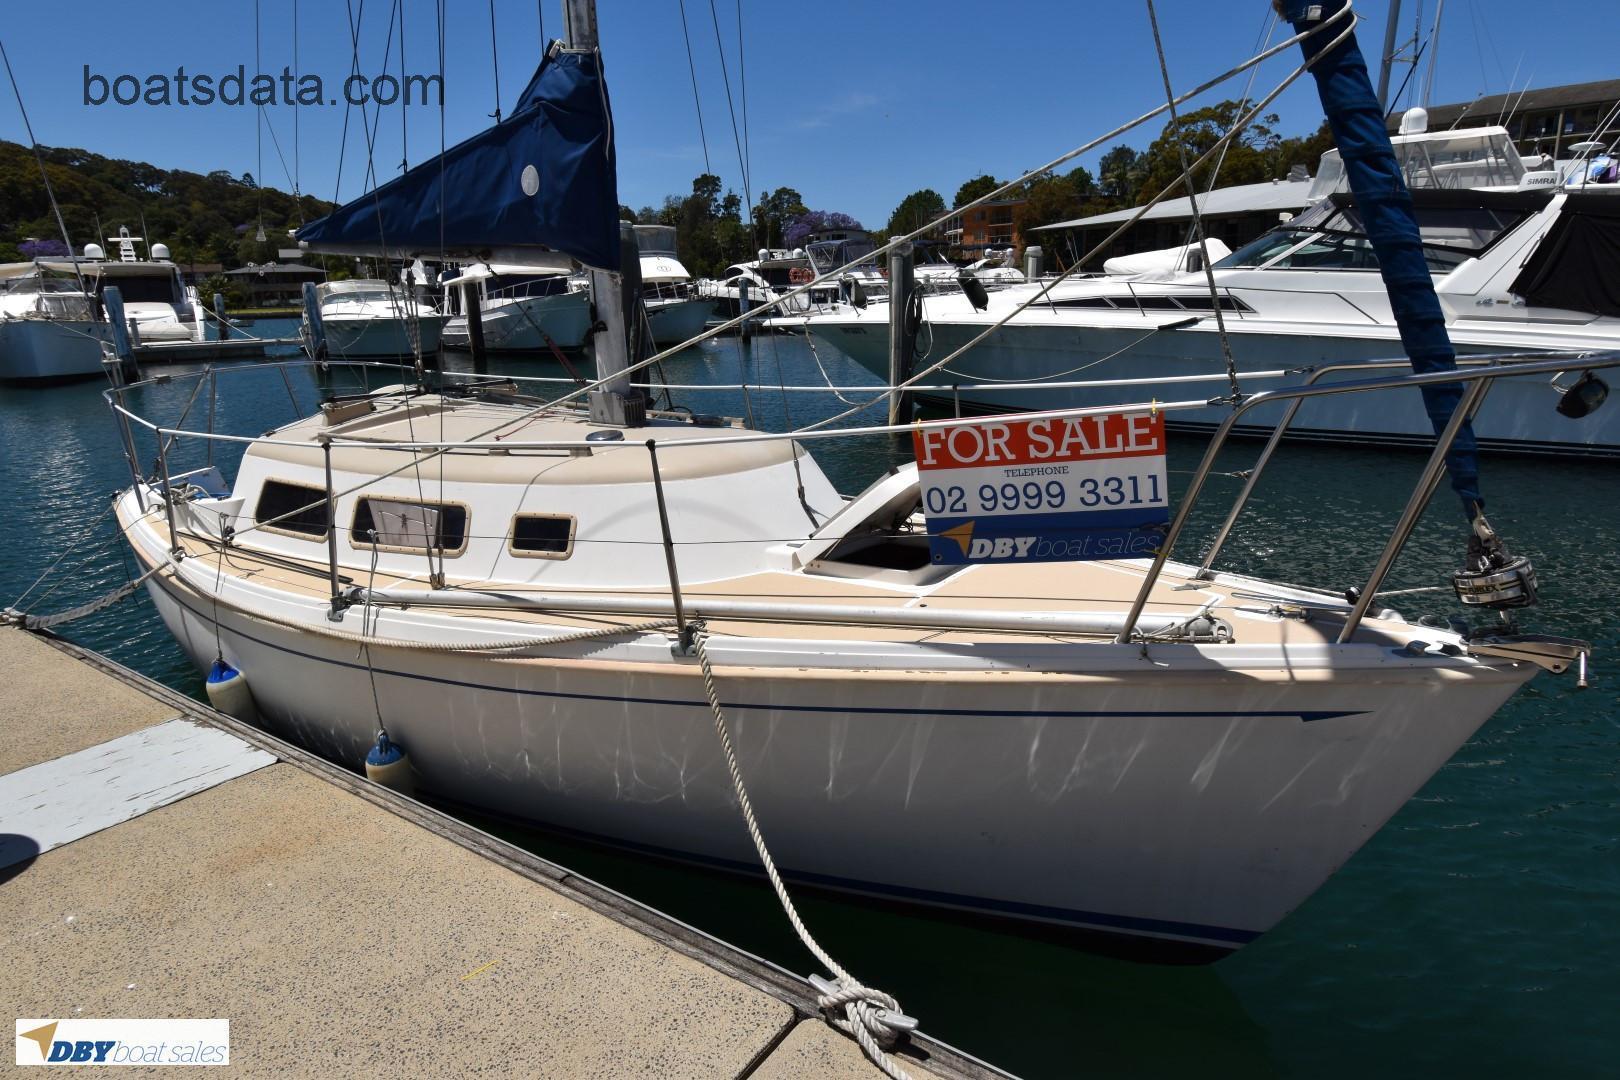 Sailboat Spacesailor 24 tv detailed specifications and features